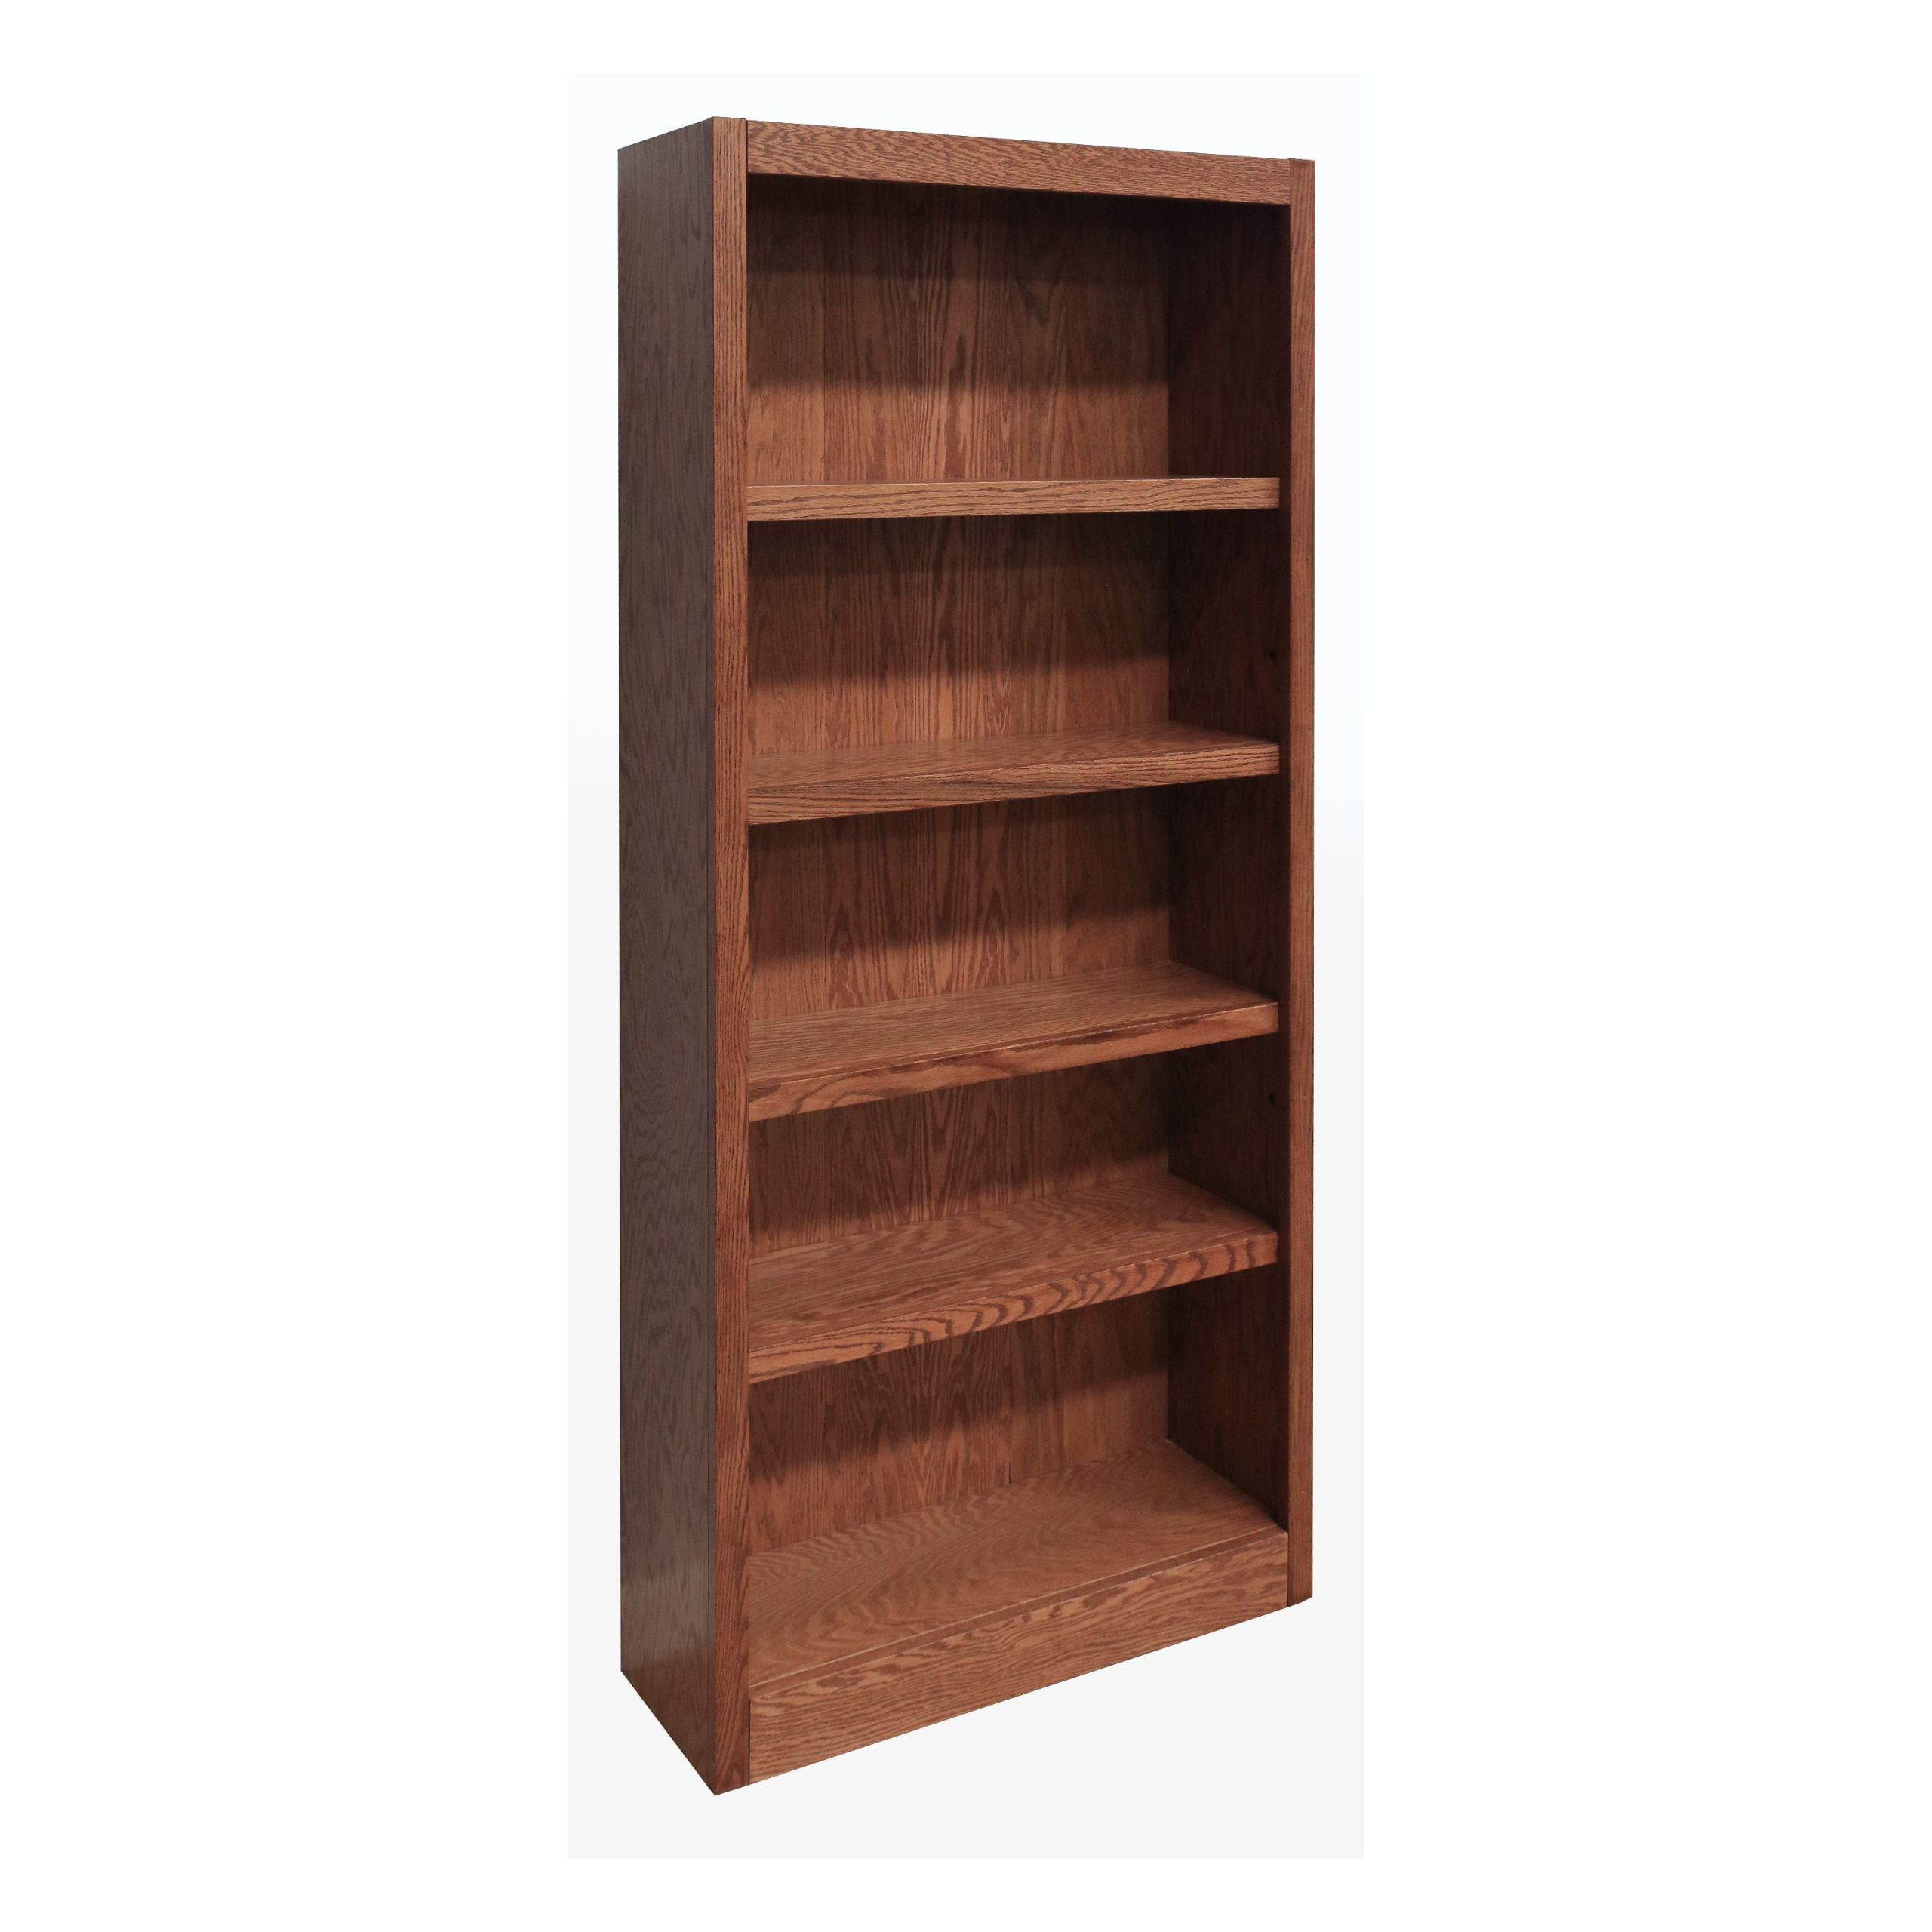 Concepts In Wood 5 Shelf Wood Bookcase, 72 Inch Tall – Oak Finish –  Walmart Throughout 72 Inch Bookcases With Cabinet (View 13 of 15)